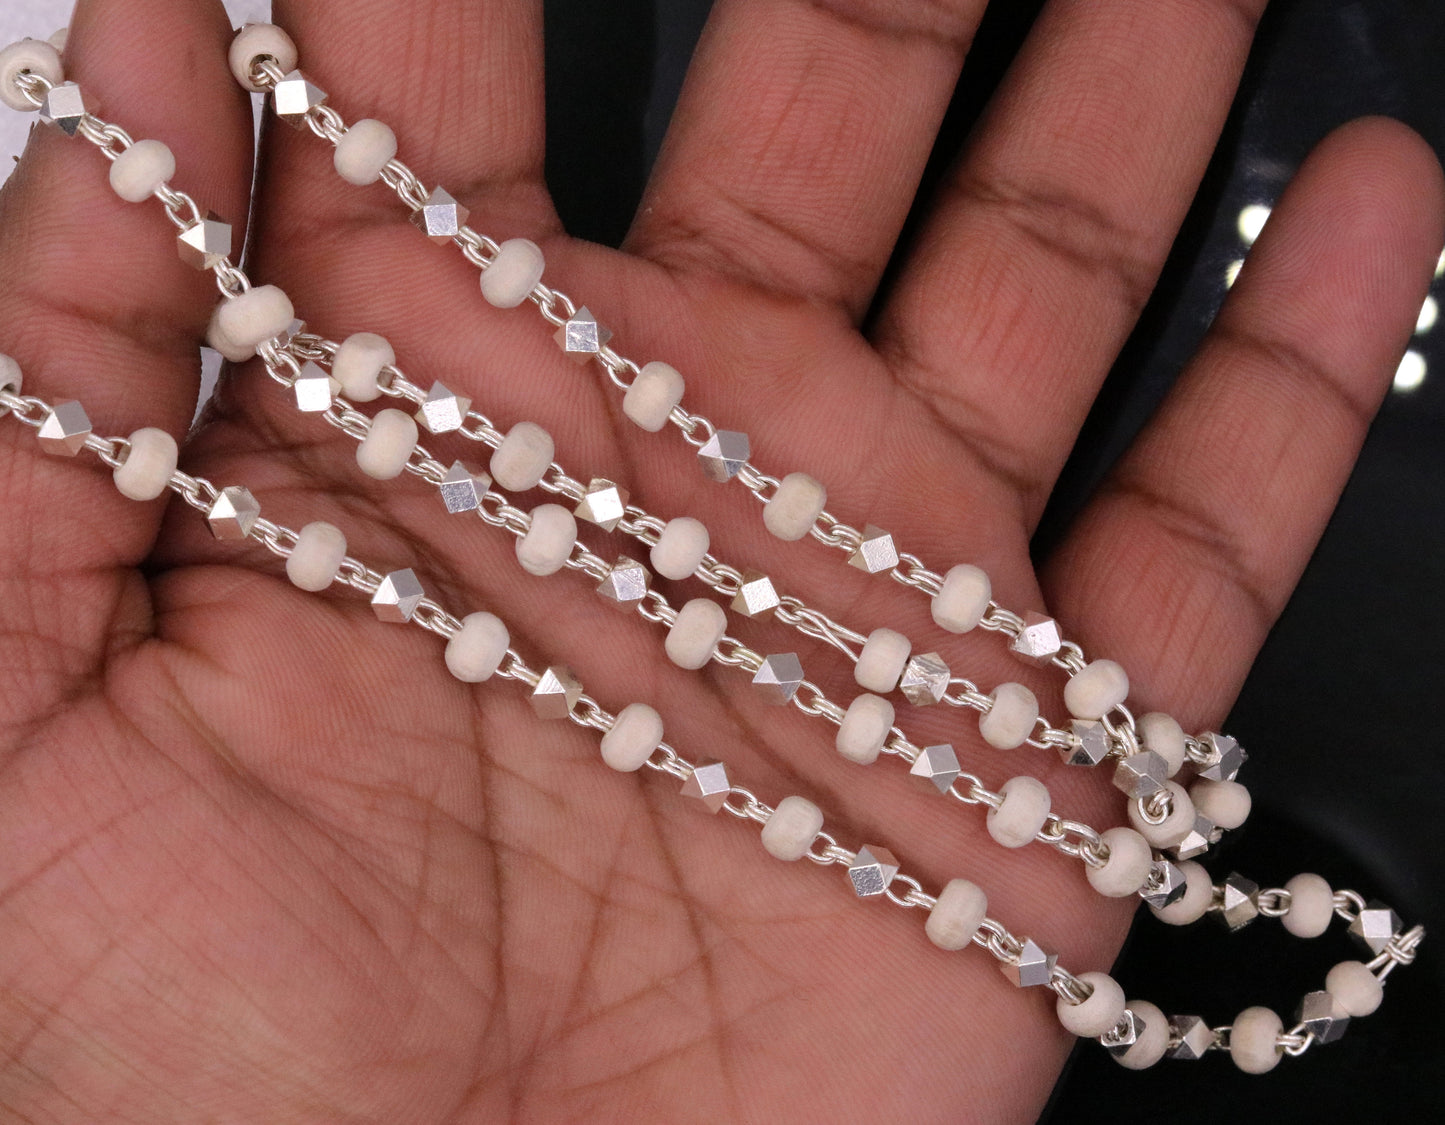 925 Silver handcrafted Basil rosary beads with silverbeads necklace chain tulsi mala use in Ayurveda for feel protected and focused ch19 - TRIBAL ORNAMENTS